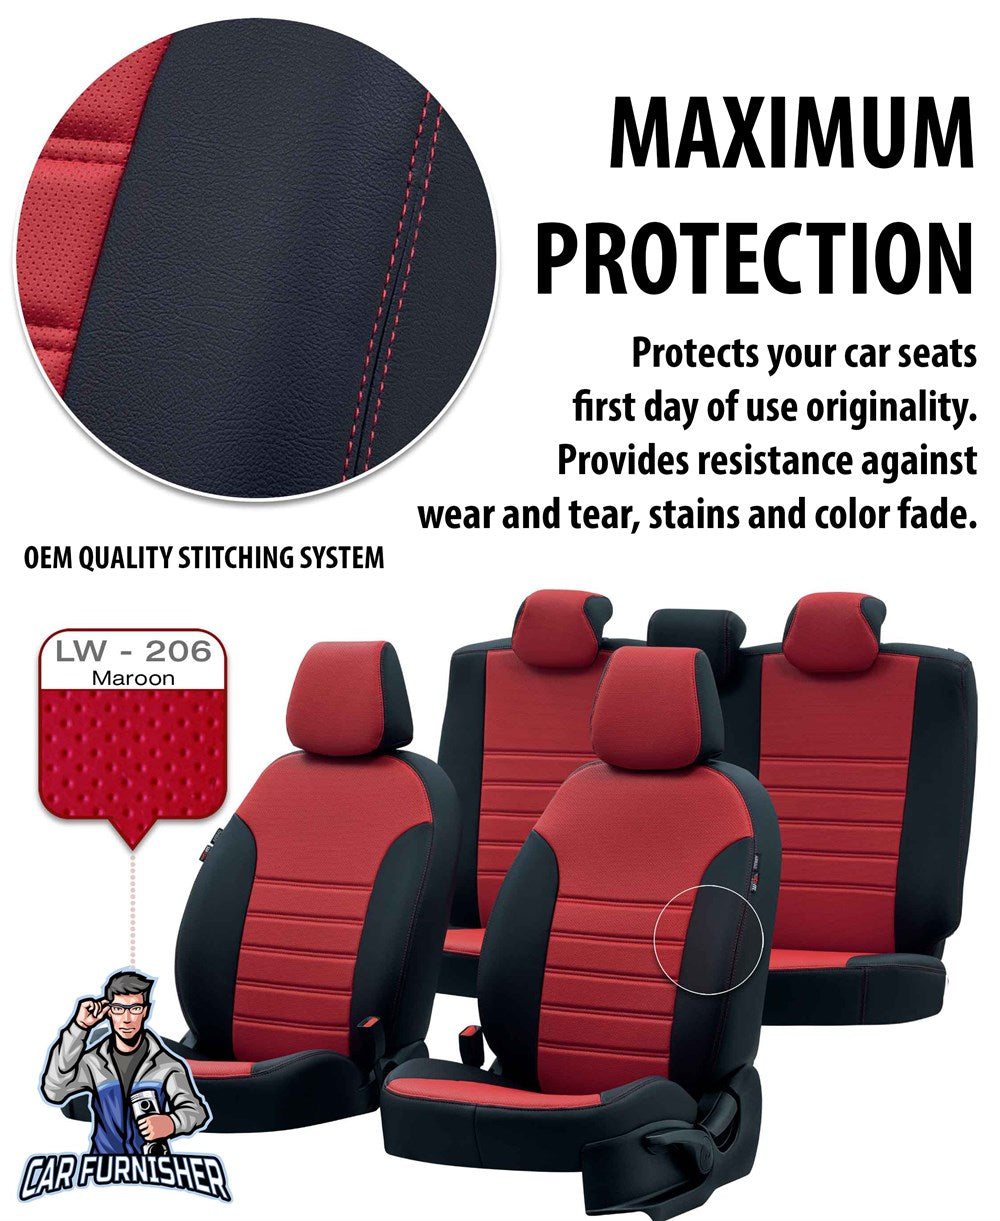 Kia Stonic Seat Covers Istanbul Leather Design Burgundy Leather